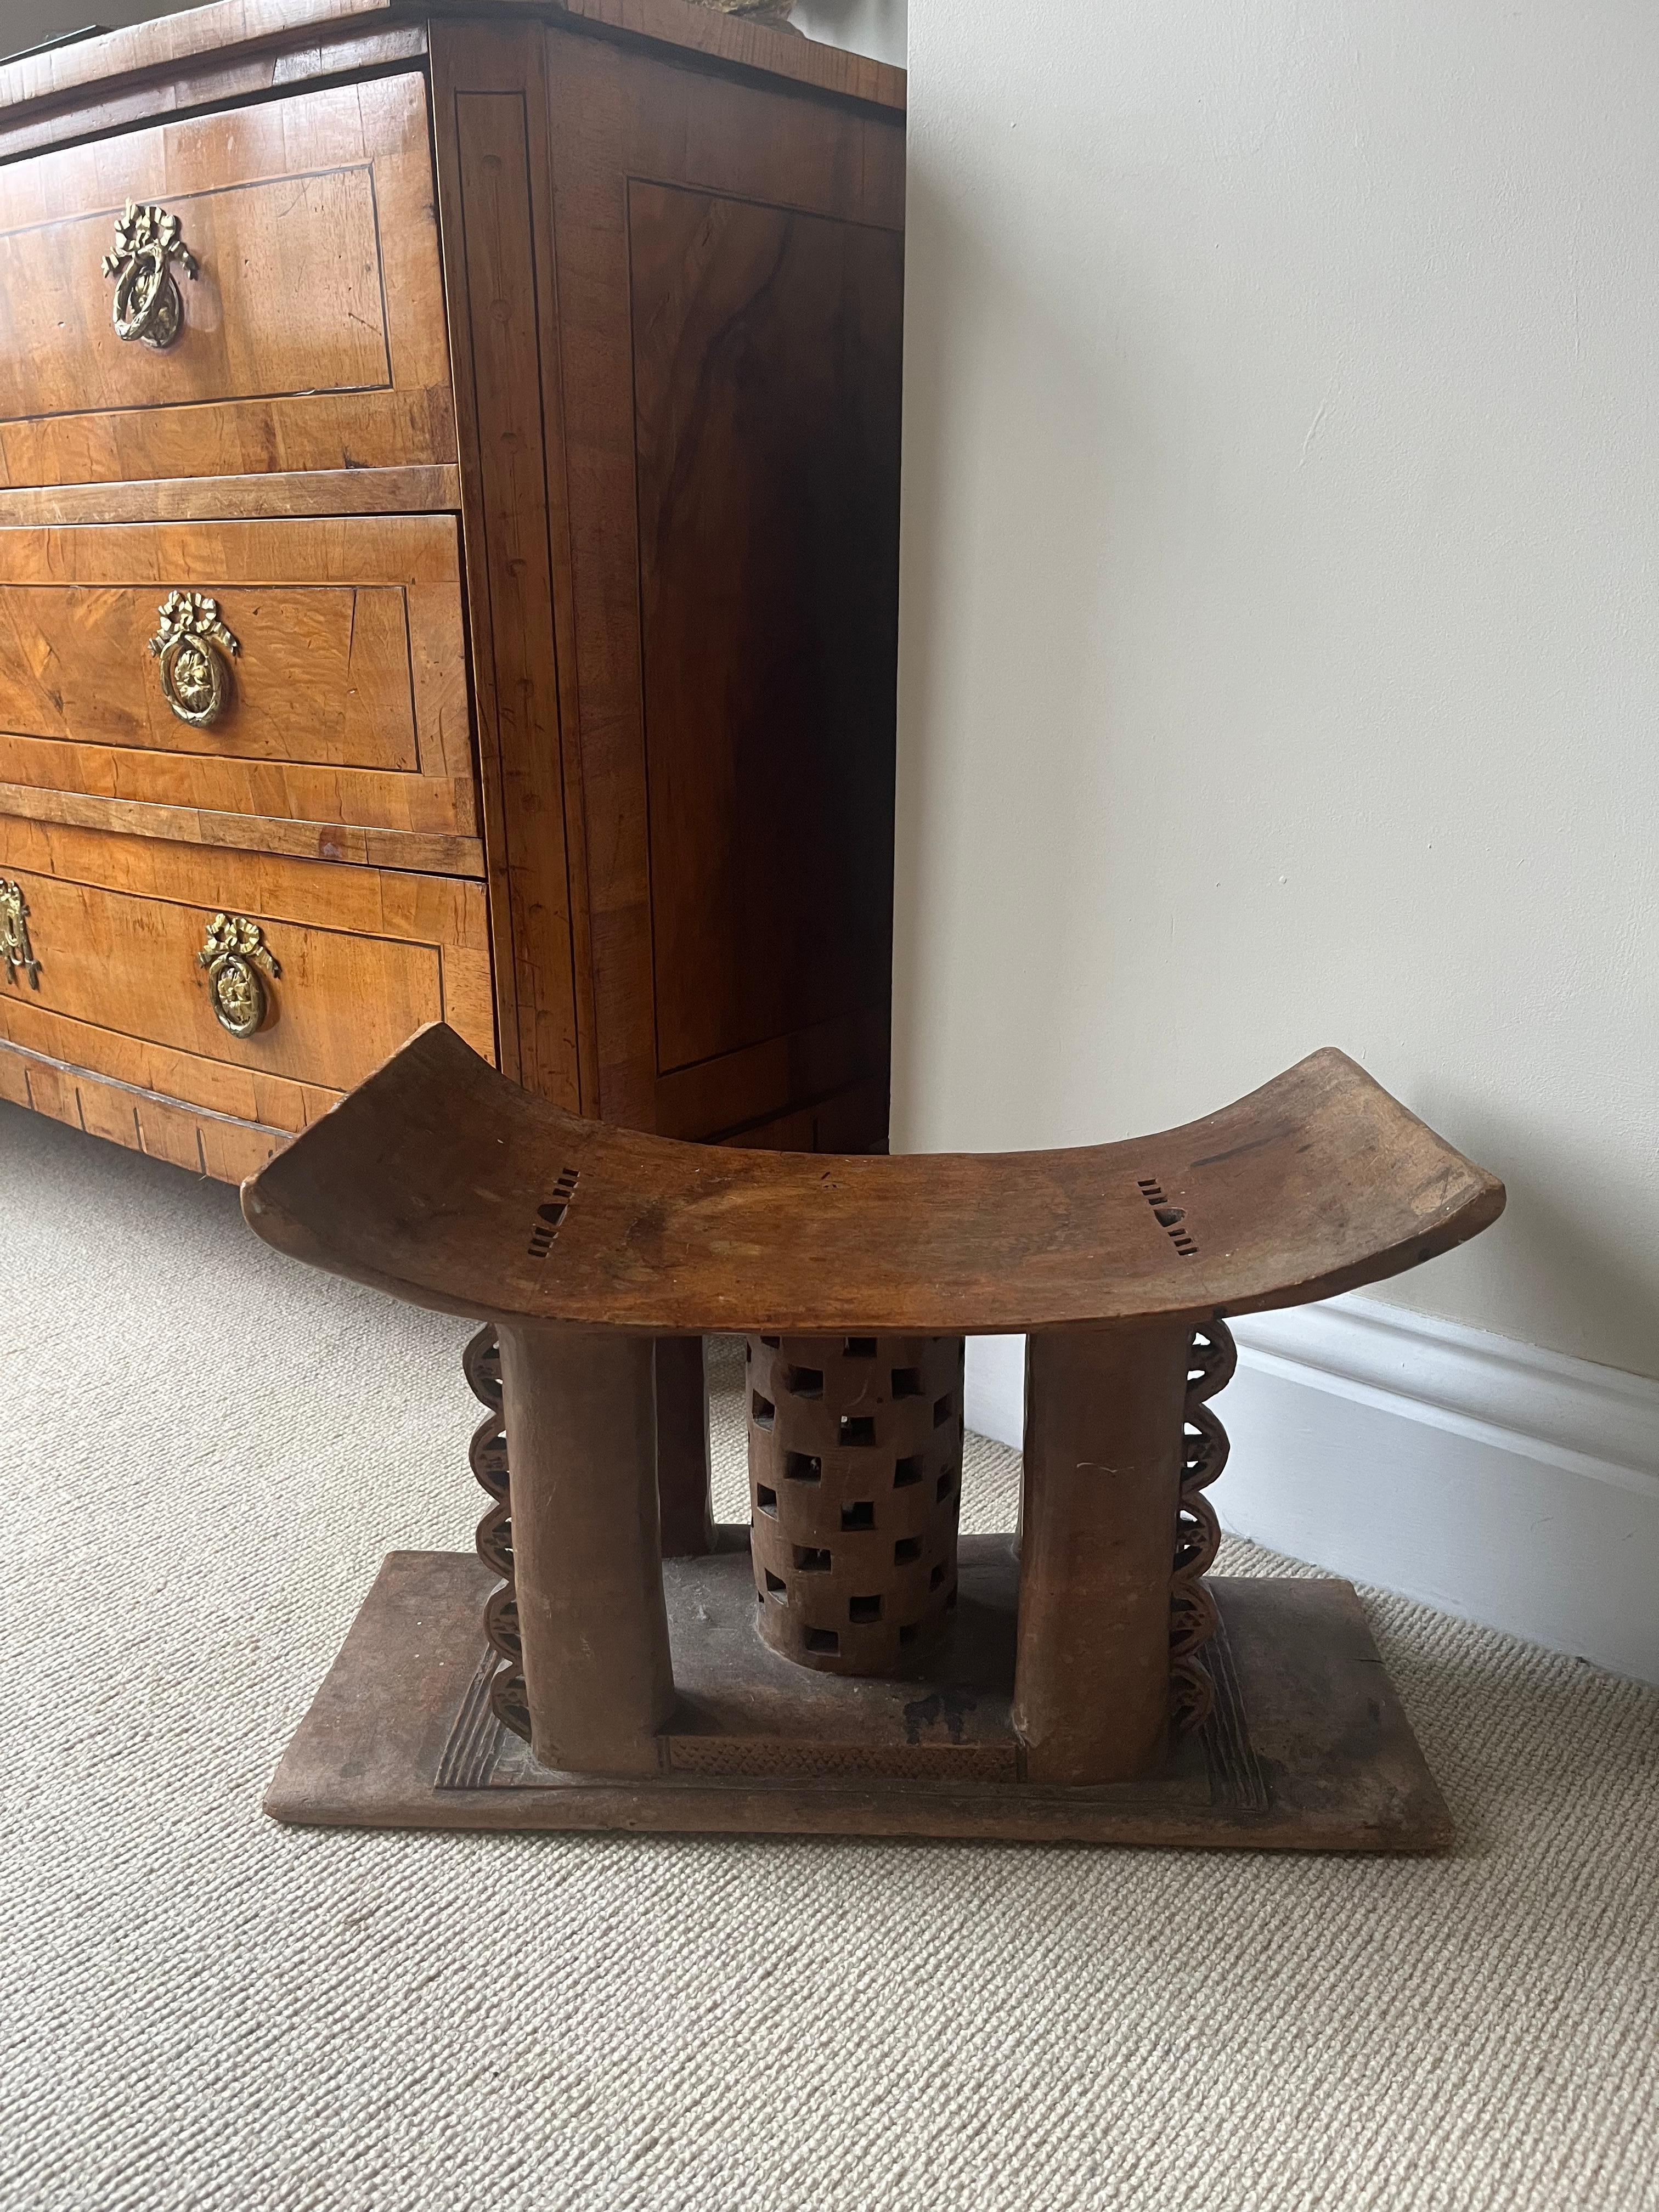 An early to mid 20th century Ashanti tribal stool. An original piece which has been well used and not produced for the tourist industry. Carved from a single piece of wood.